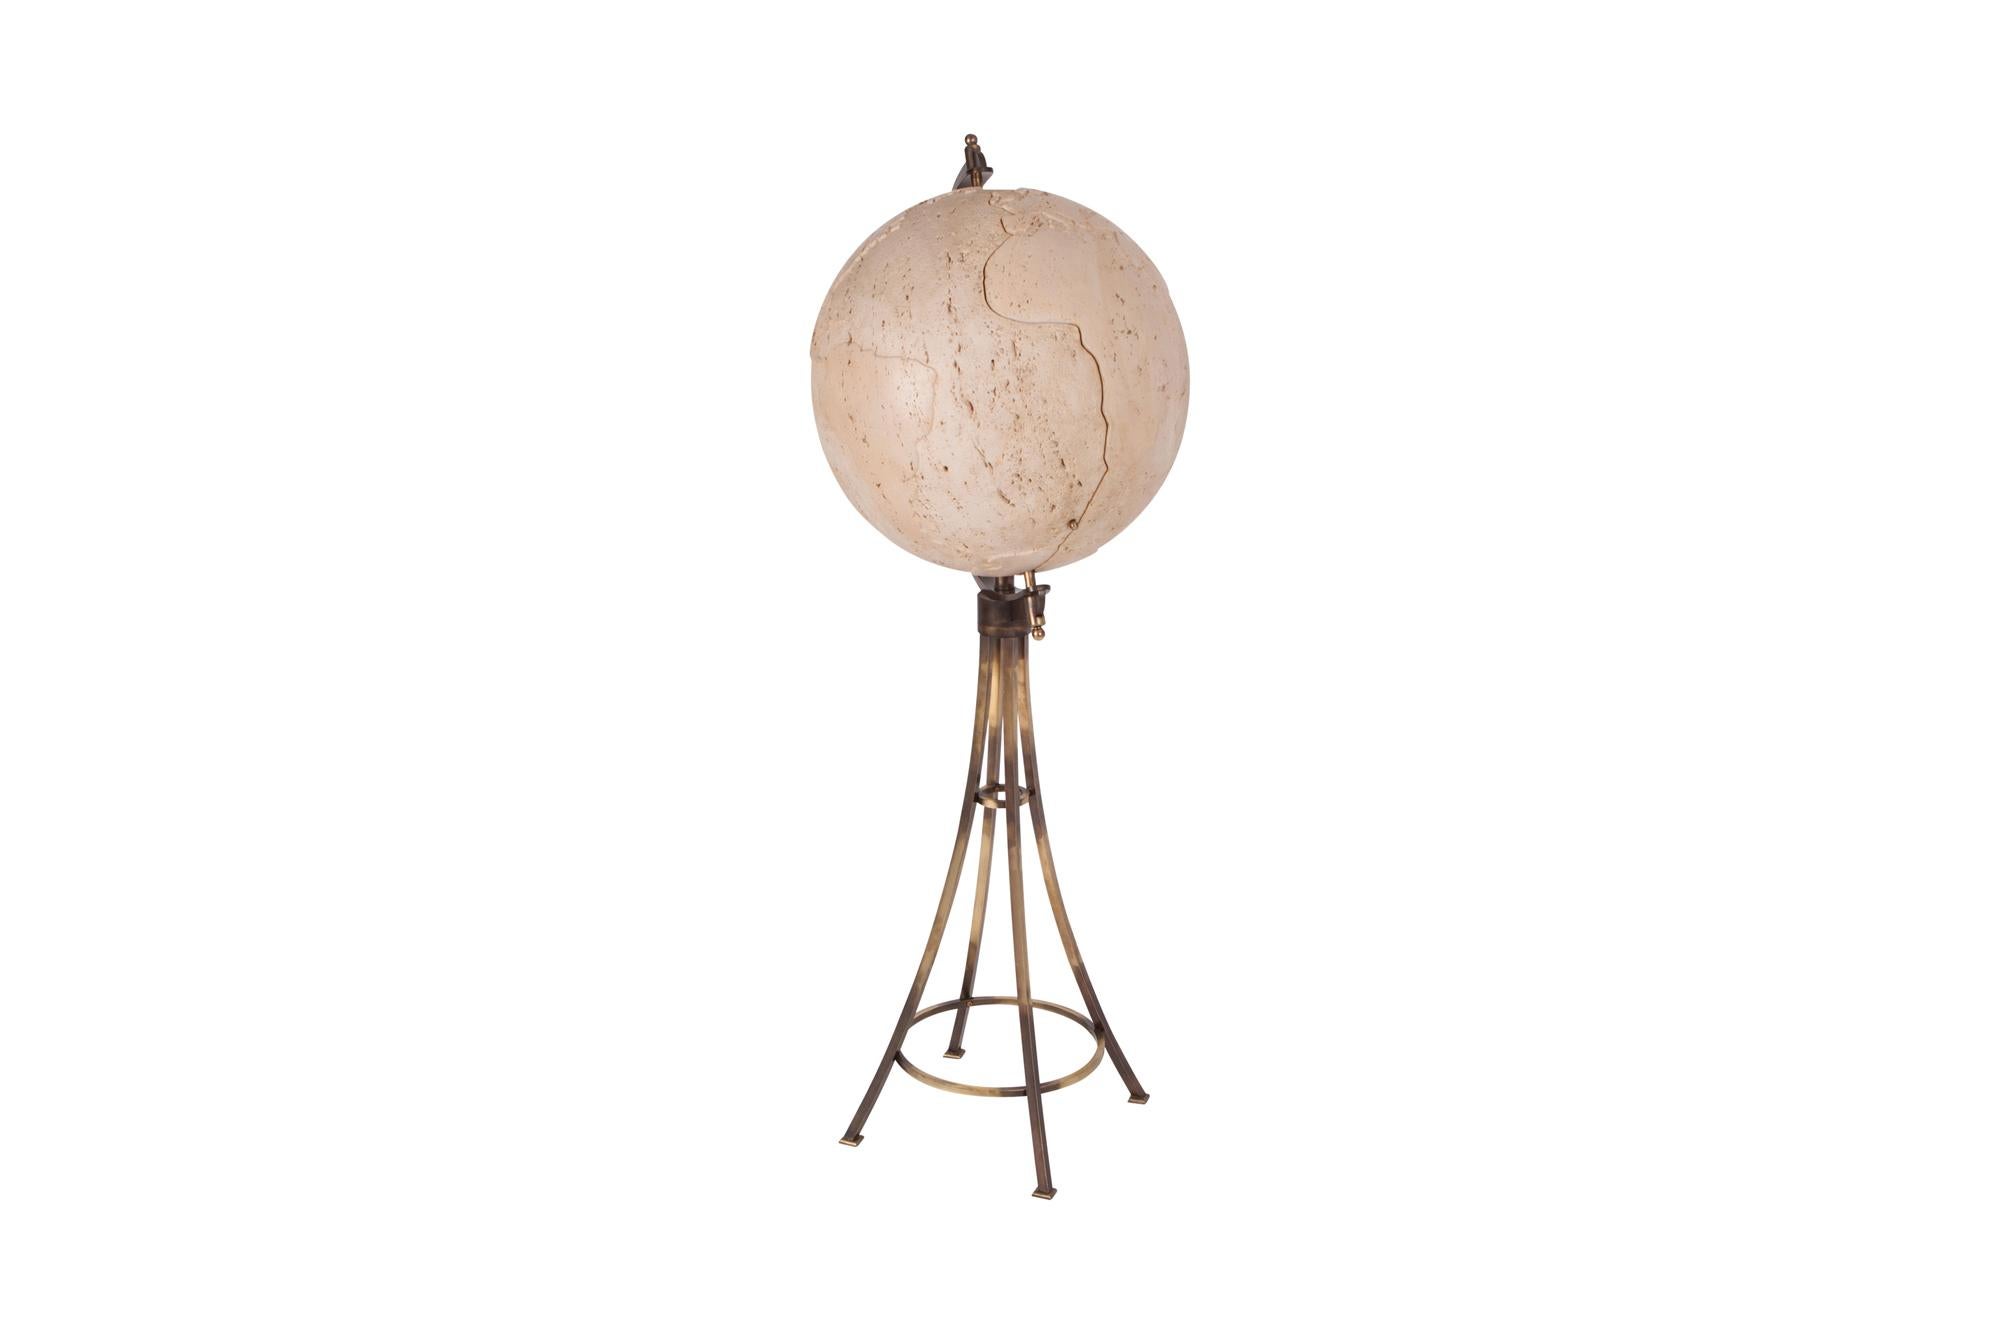 French bar unit, sculptural brass feet support the Moon. 

A small hidden brass lever opens up the globe presenting a bottle holding unit that can hold up to 12 large bottles.
A true midcentury eyecatcher.
Check out our Goldwood storefront for more